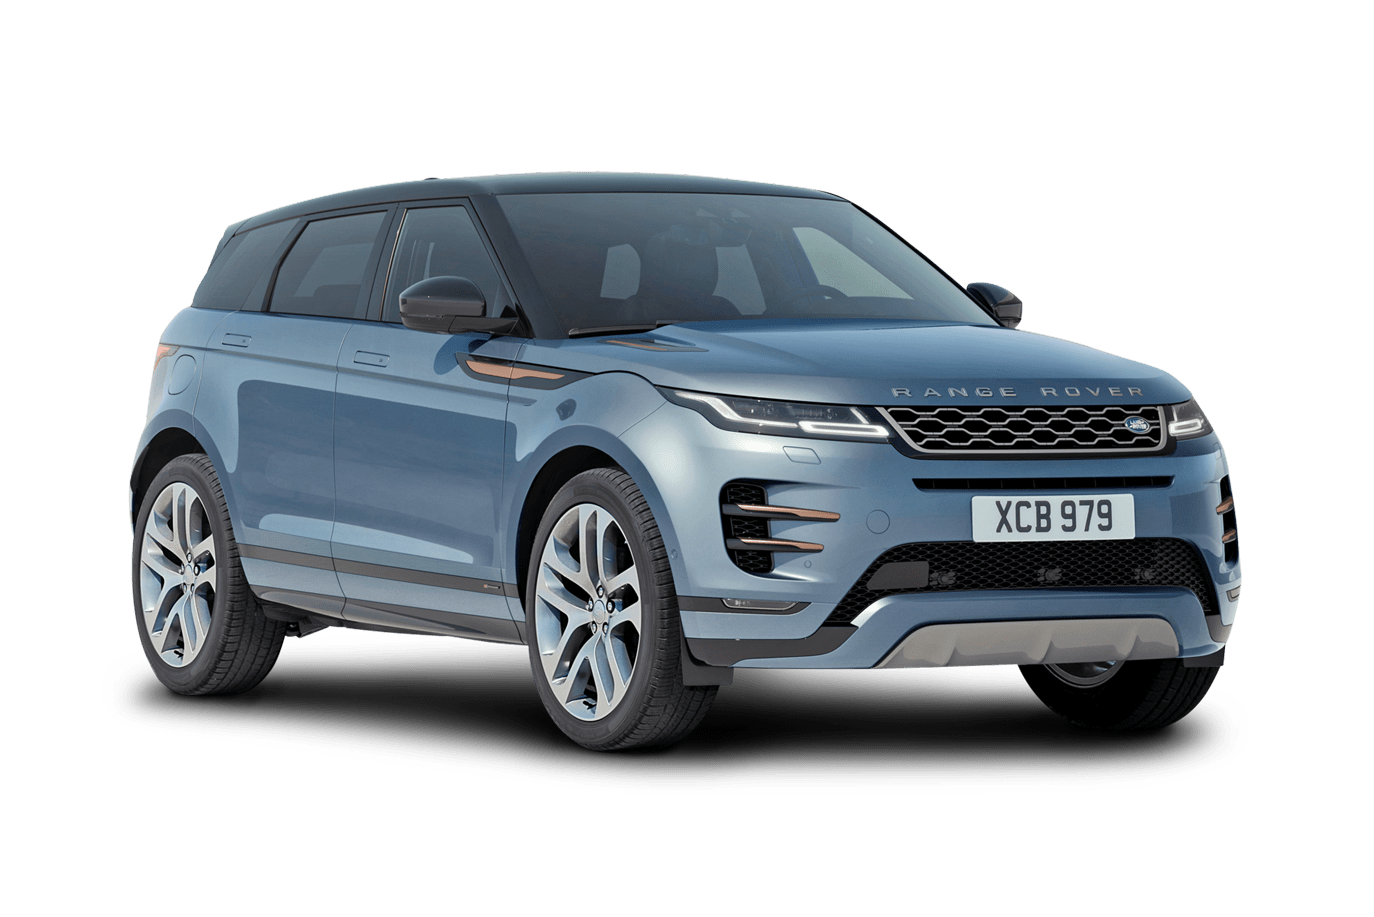 Range Rover Evoque Models 2020  - Pricing And Which One To Buy.